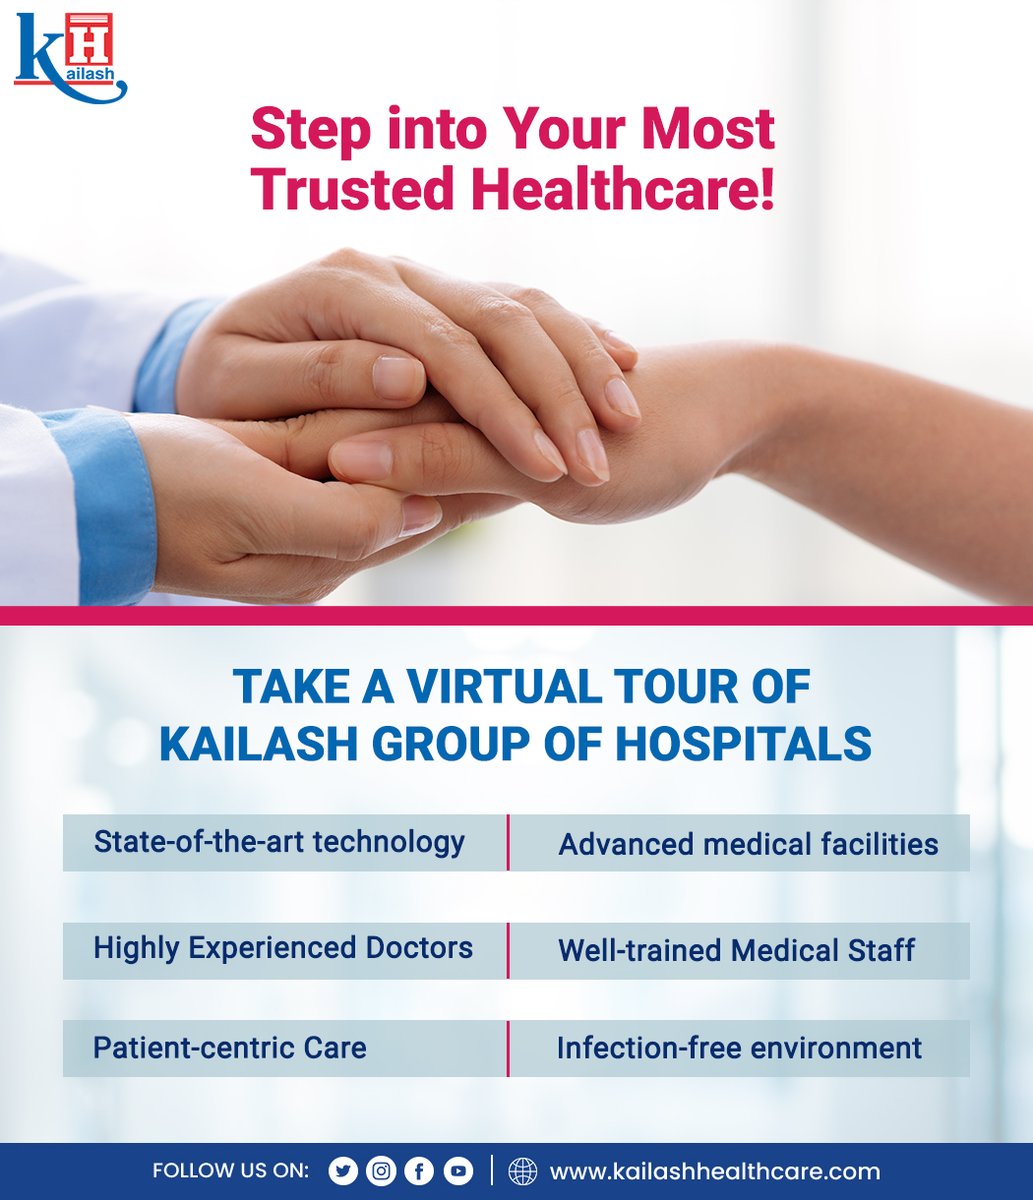 With decades of Trust and patient-centric care Kailash Hospital is the City's most preferred Healthcare.

To know about our medical expertise visit: kailashhealthcare.com

#healthcare #besthospital #CompassionateCare #tophospitals #kailashhospital #kailashgroupofhospitals